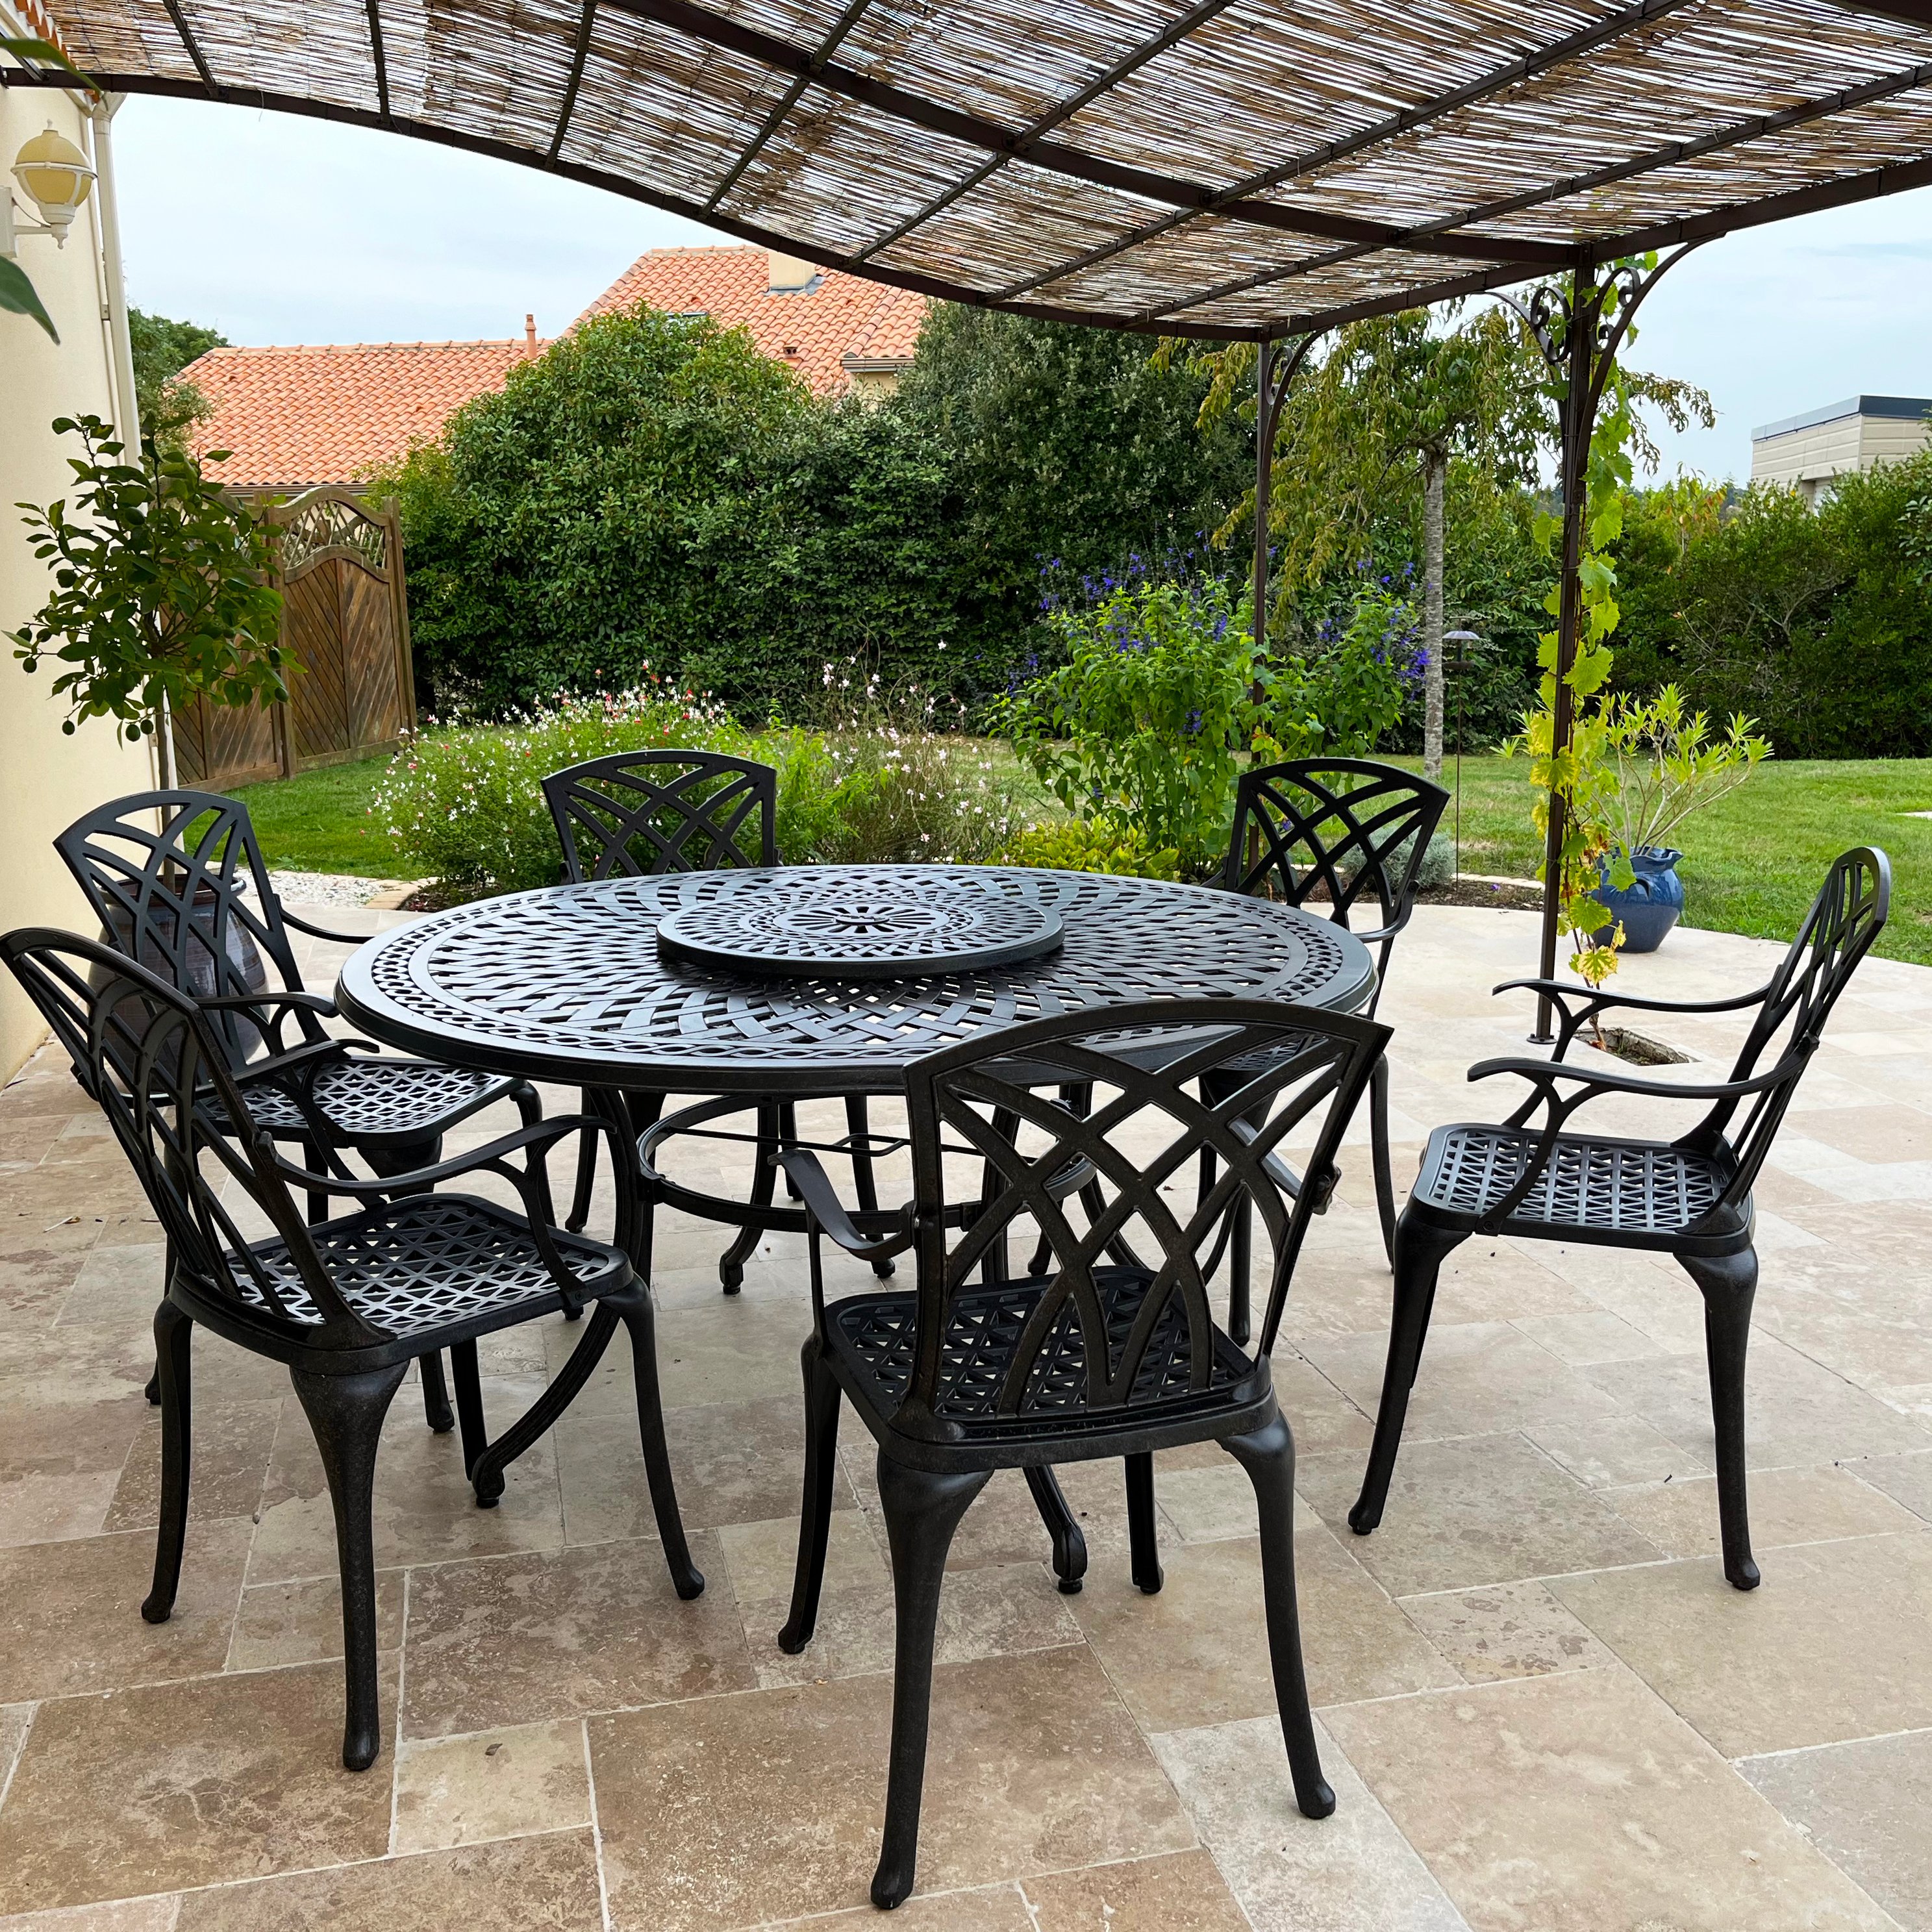 Our Frances Garden Table Set on a Covered Patio